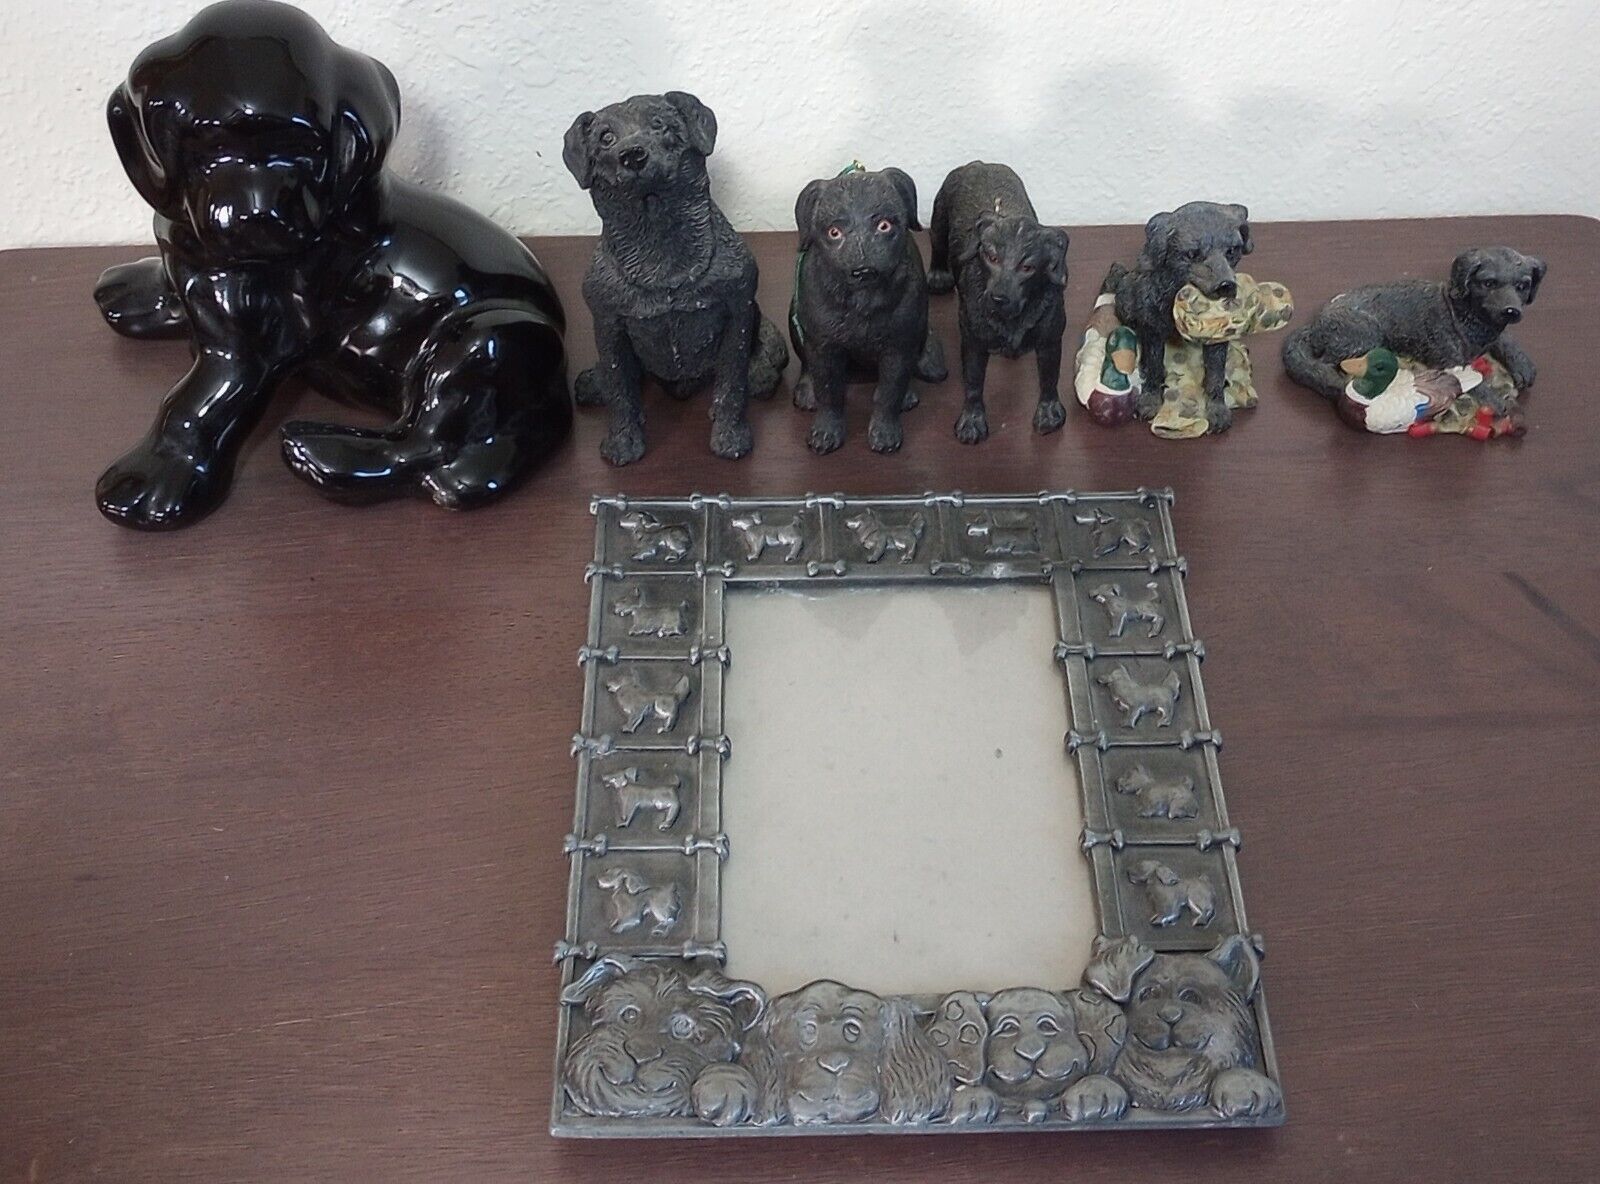 Black Lab Ornaments, Figurines, and picture frame lot - 7 pcs